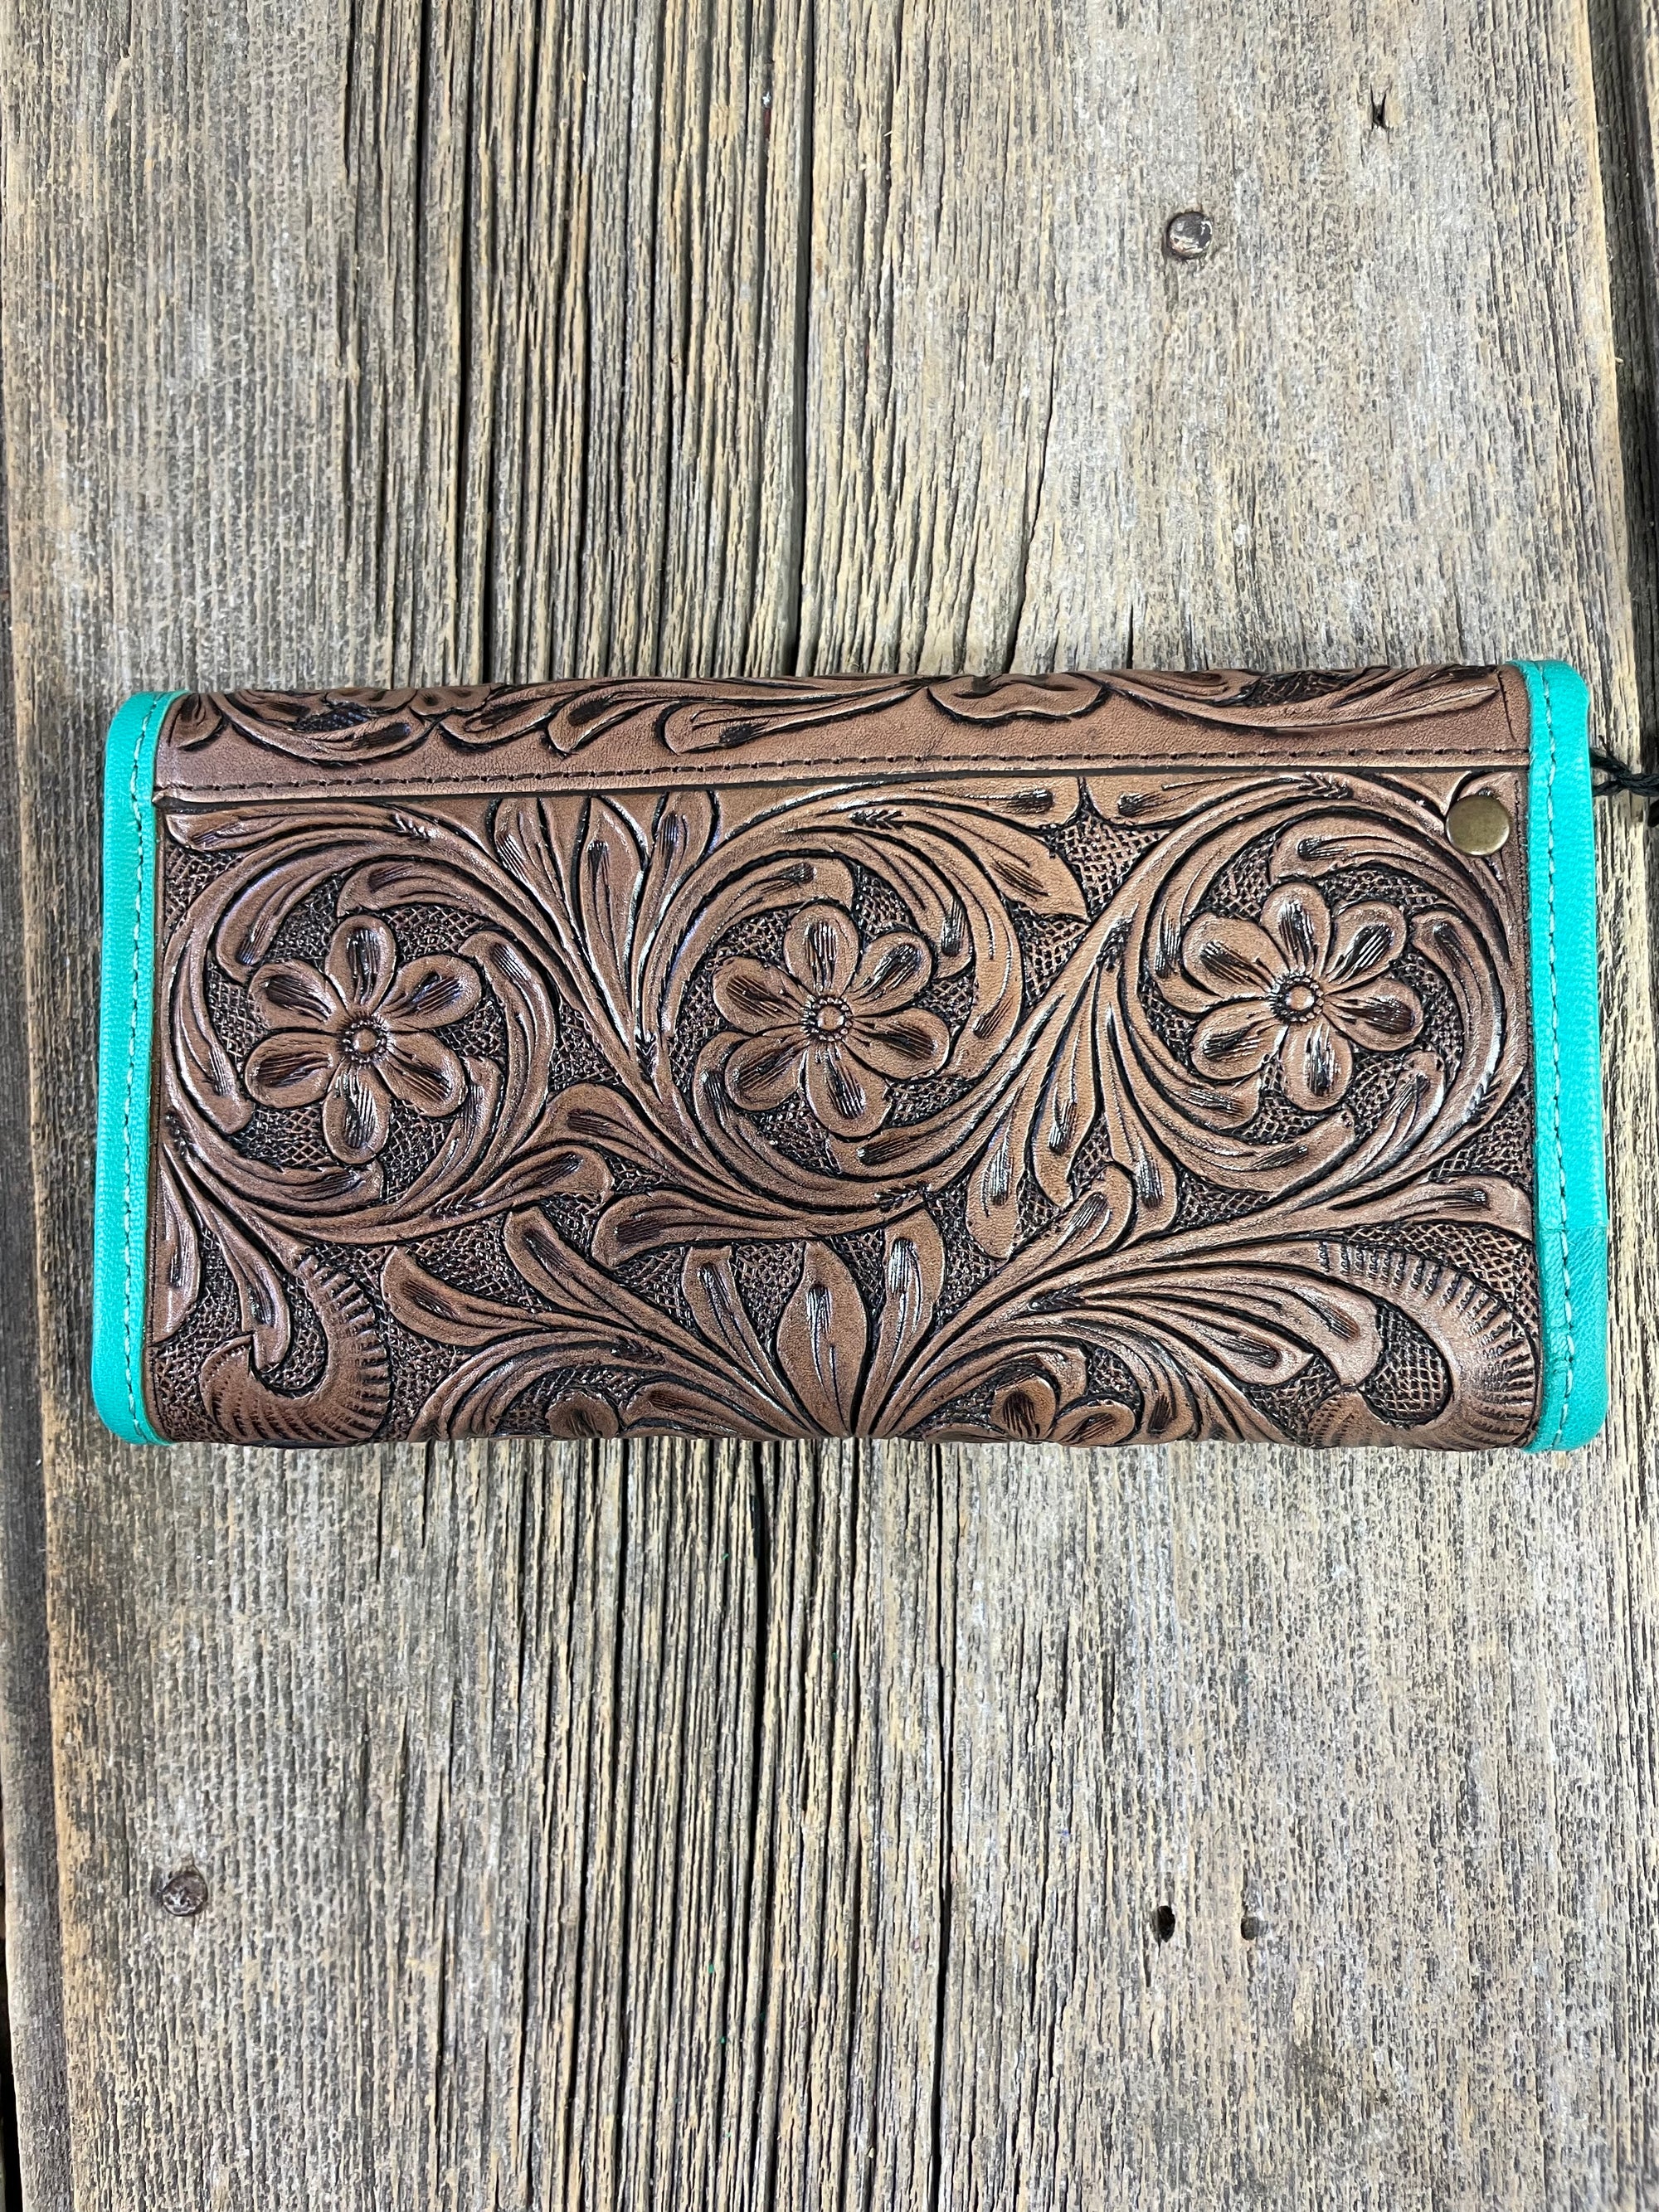 Tooled Leather Turquoise Tri Fold Wallet